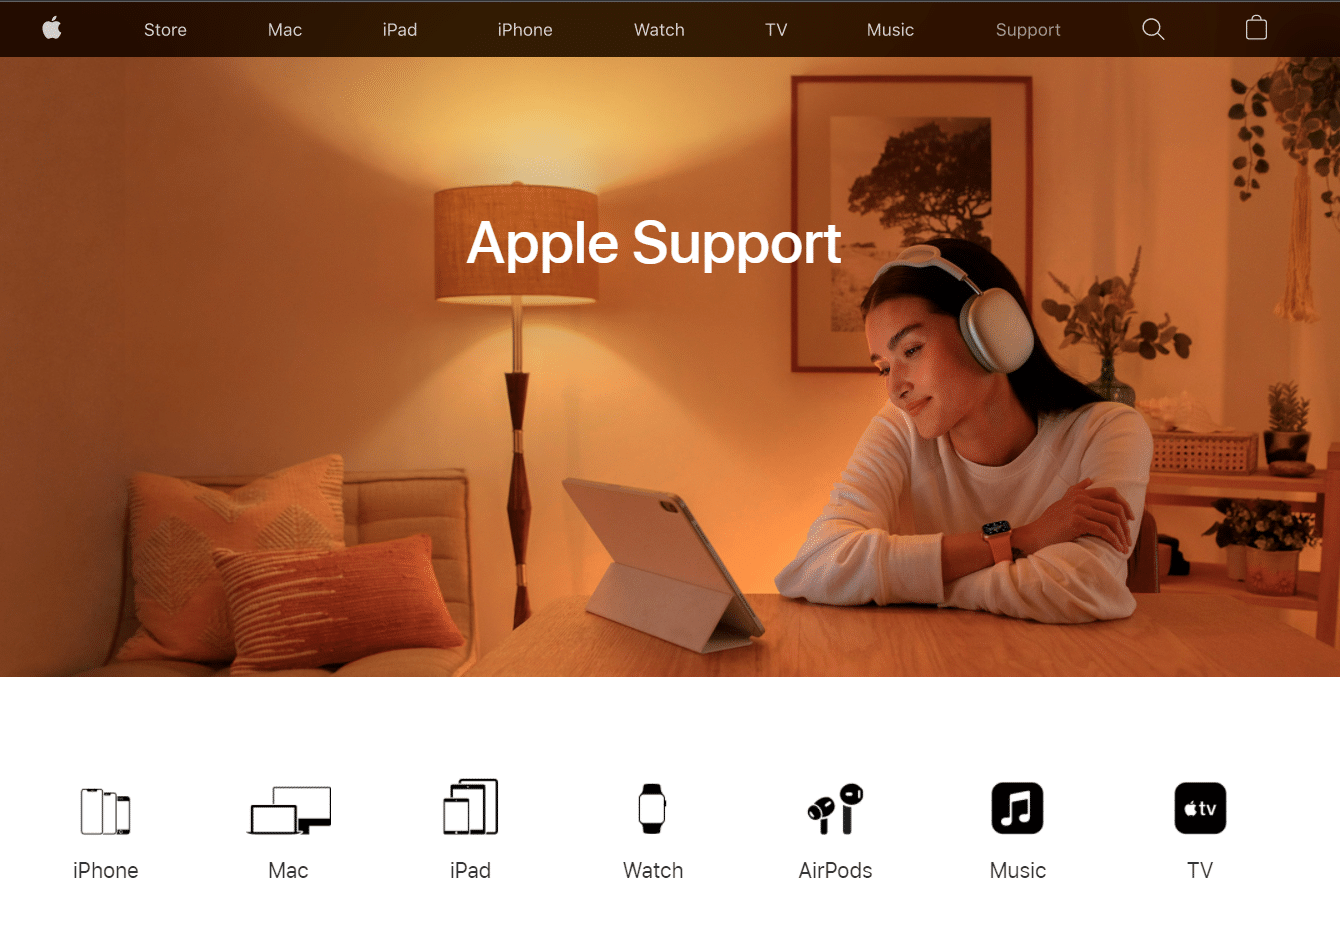 Apple Support webpage